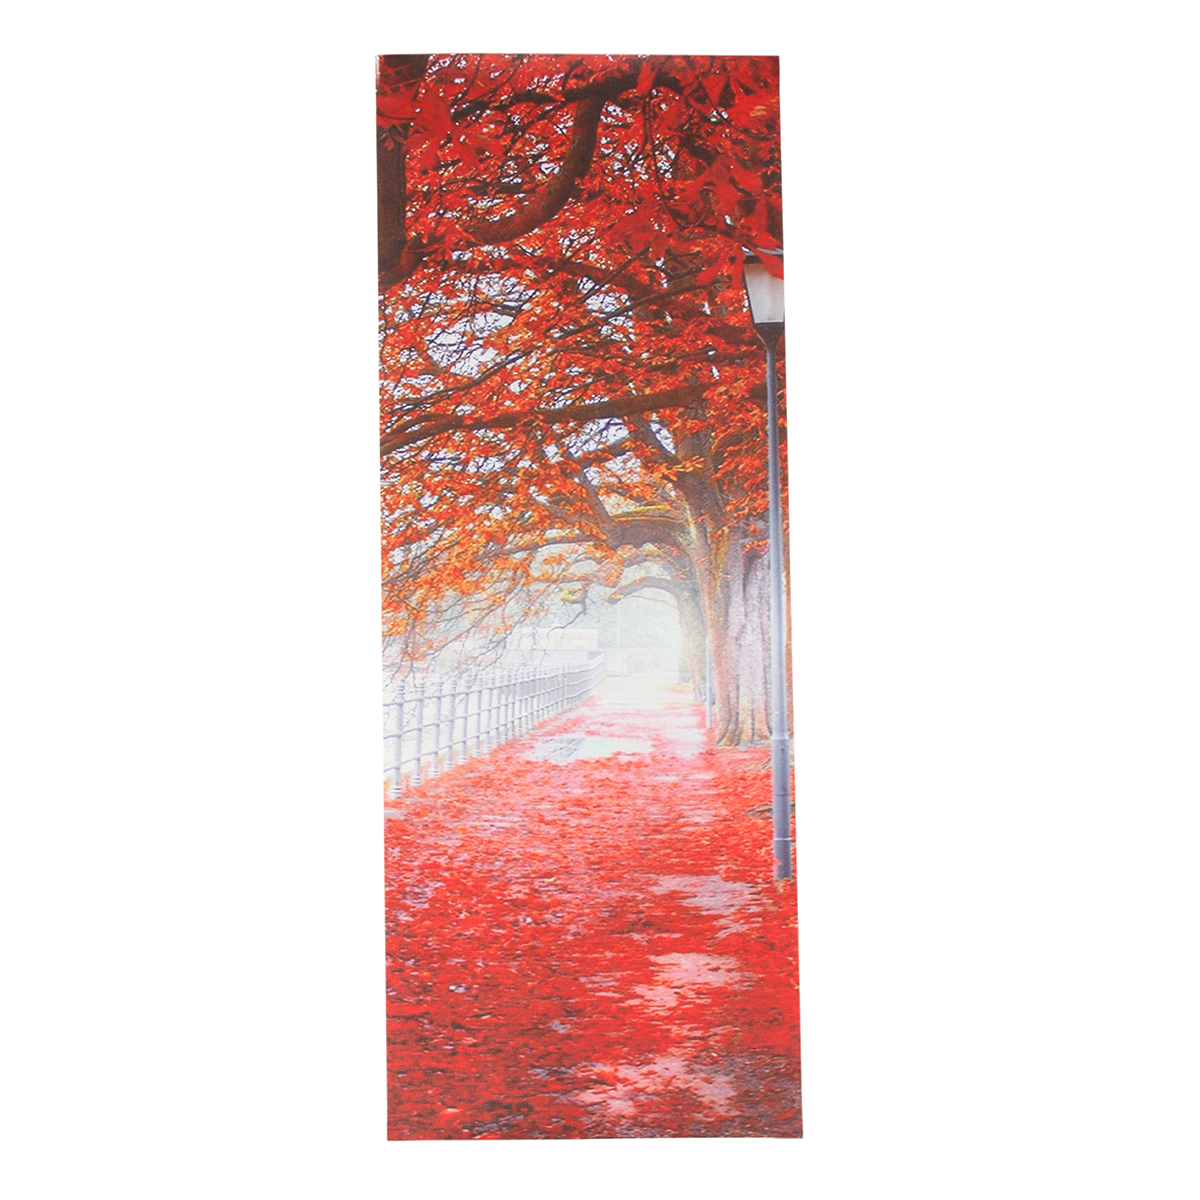 Find 5Pcs Red Falling Leaves Canvas Painting Autumn Tree Wall Decorative Print Art Pictures Unframed Wall Hanging Home Office Decorations for Sale on Gipsybee.com with cryptocurrencies